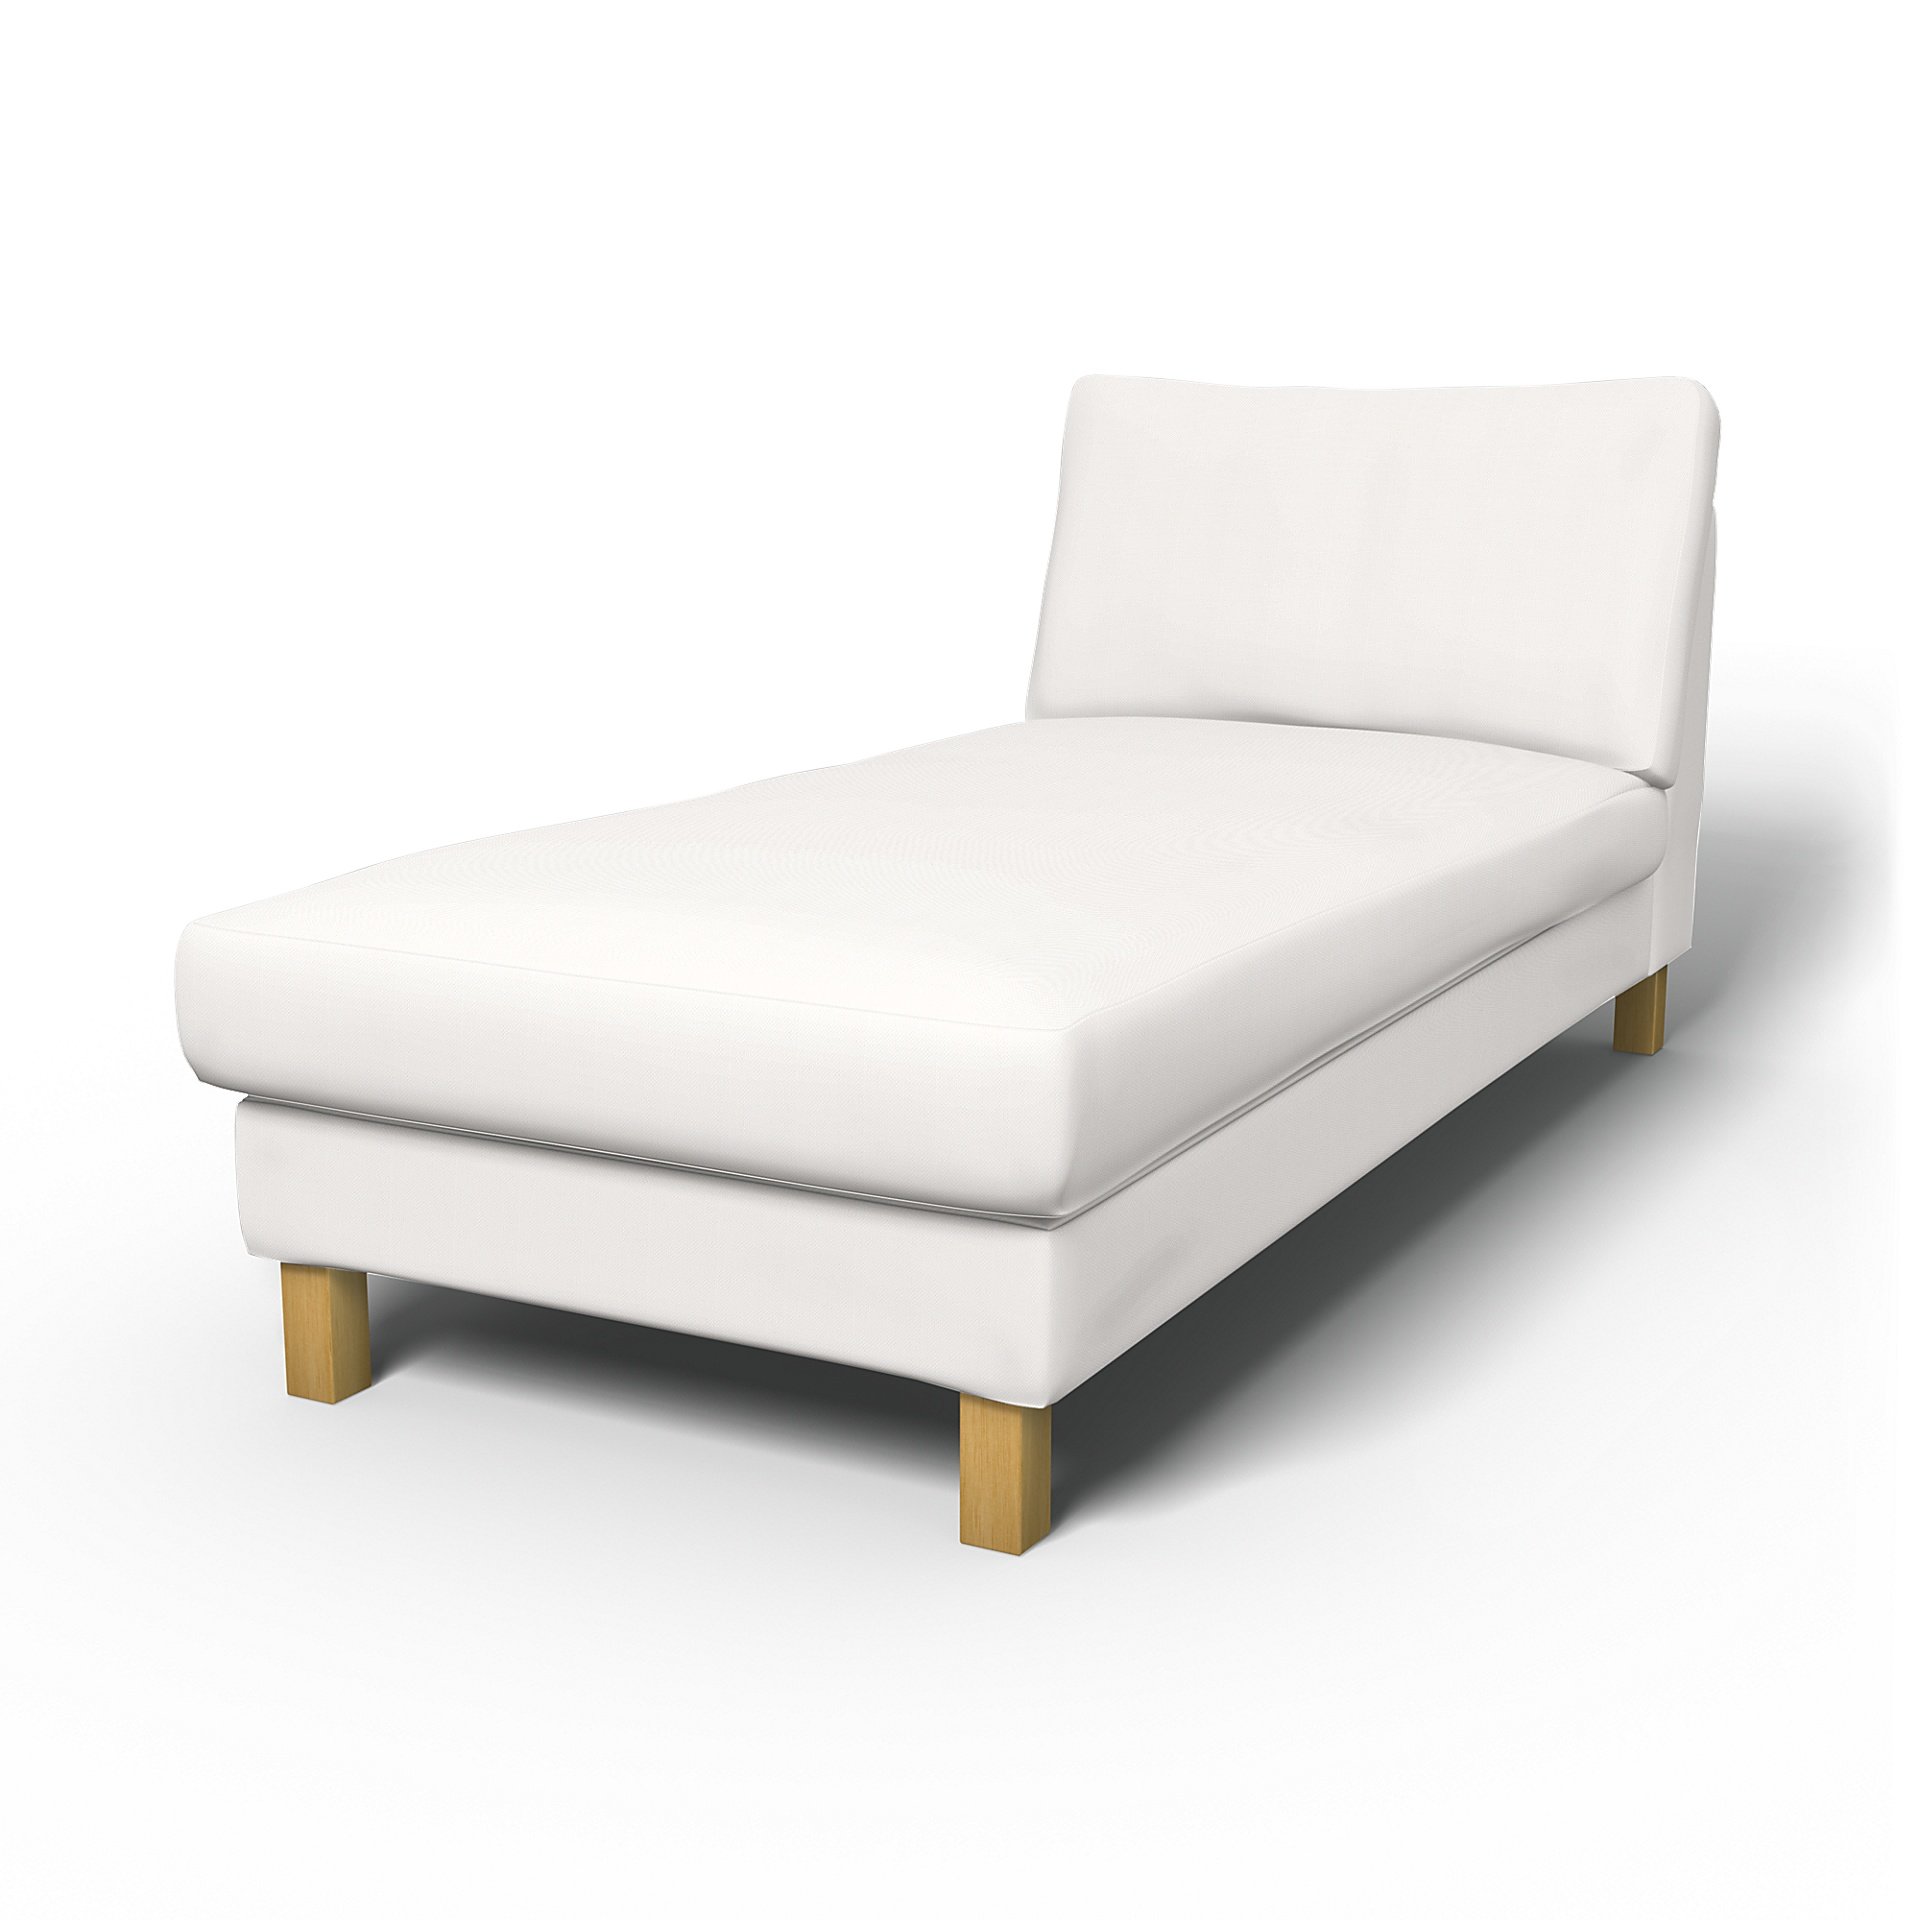 IKEA - Karlstad Stand Alone Chaise Longue Cover, Soft White, Linen - Bemz